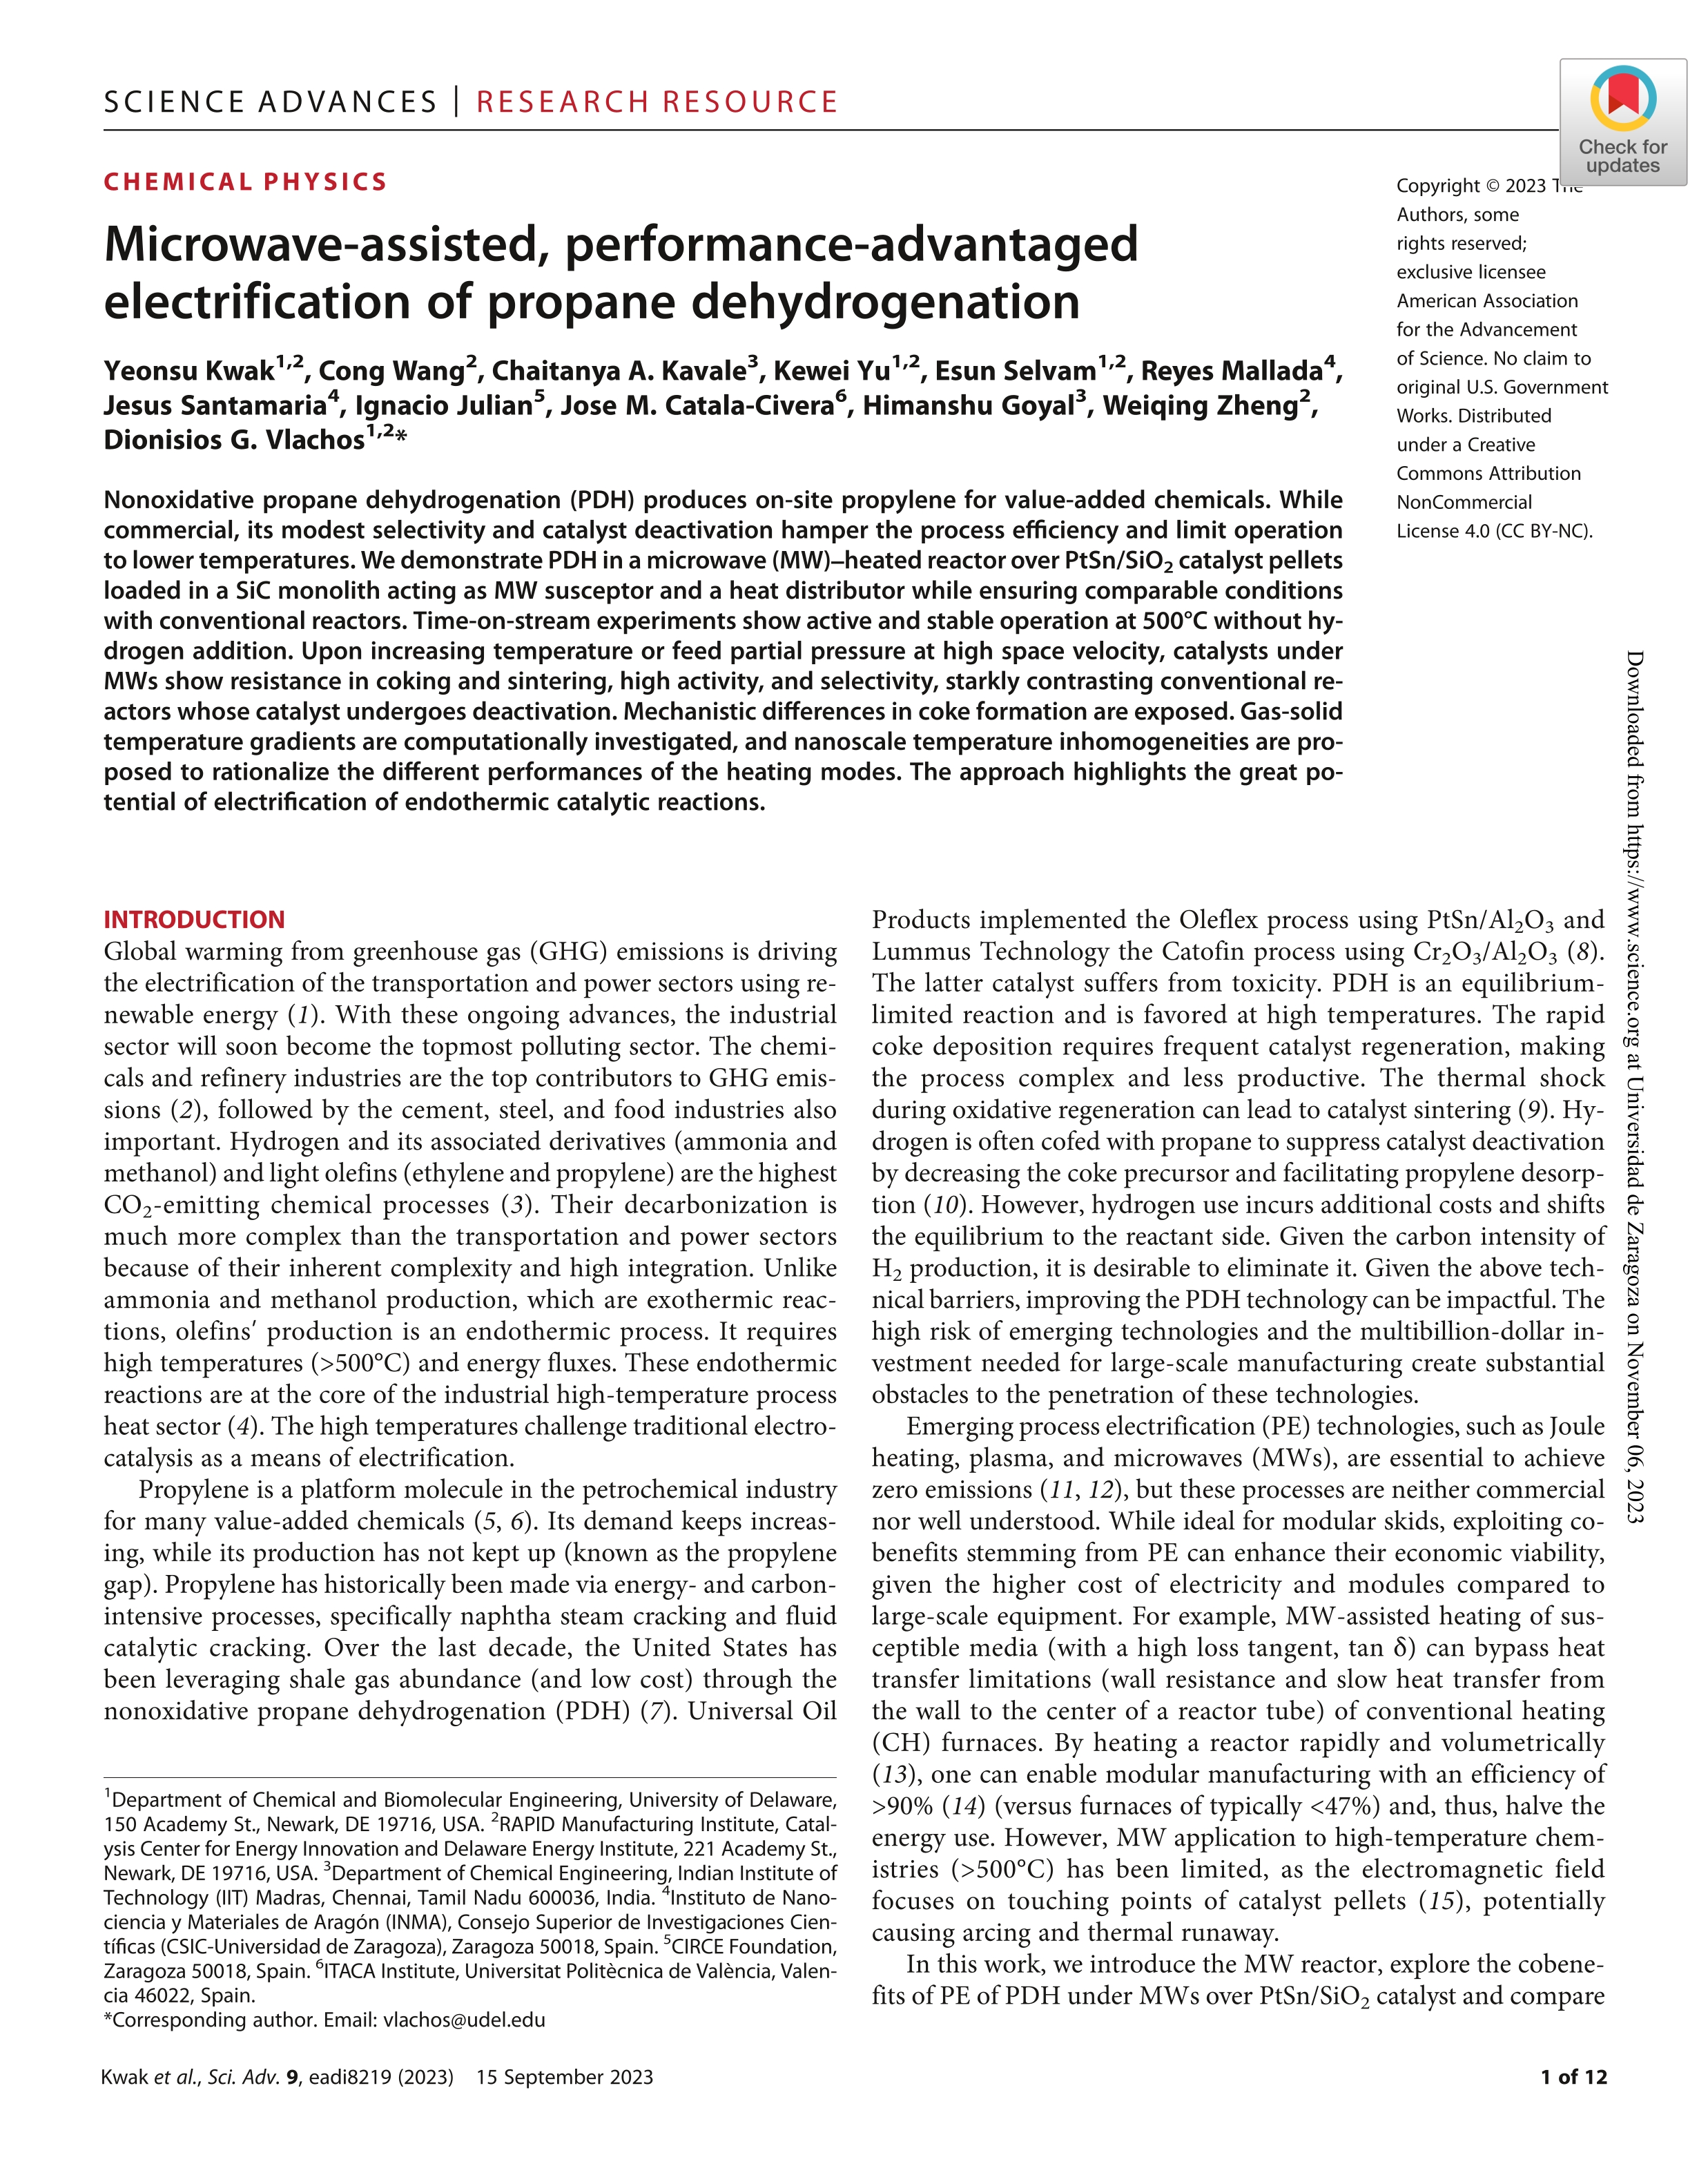 Microwave-assisted, performance-advantaged electrification of propane dehydrogenation